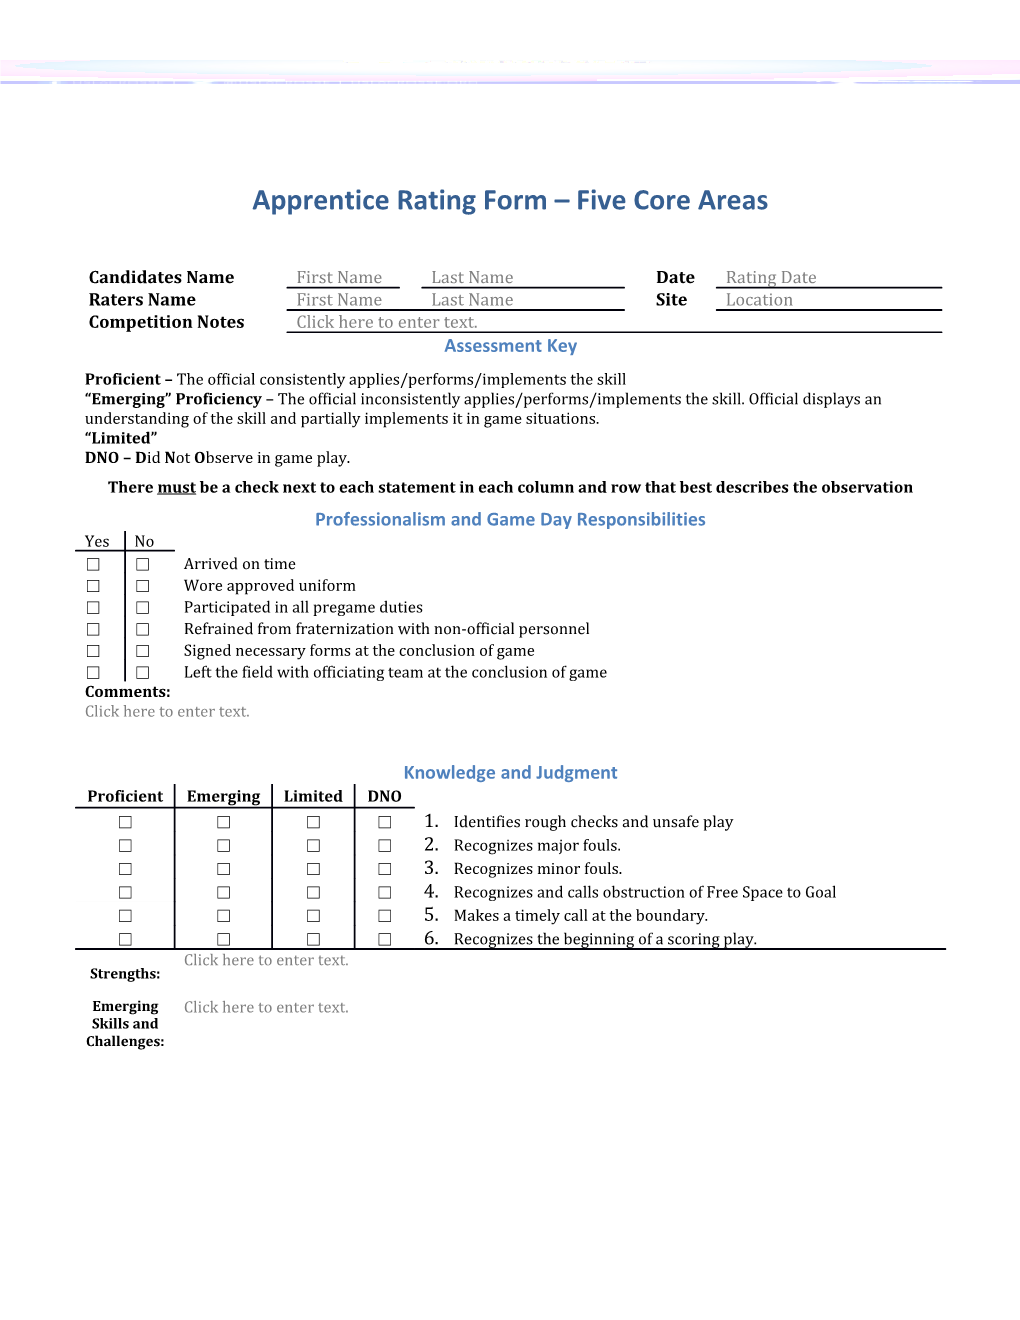 Apprentice Rating Form Five Core Areas